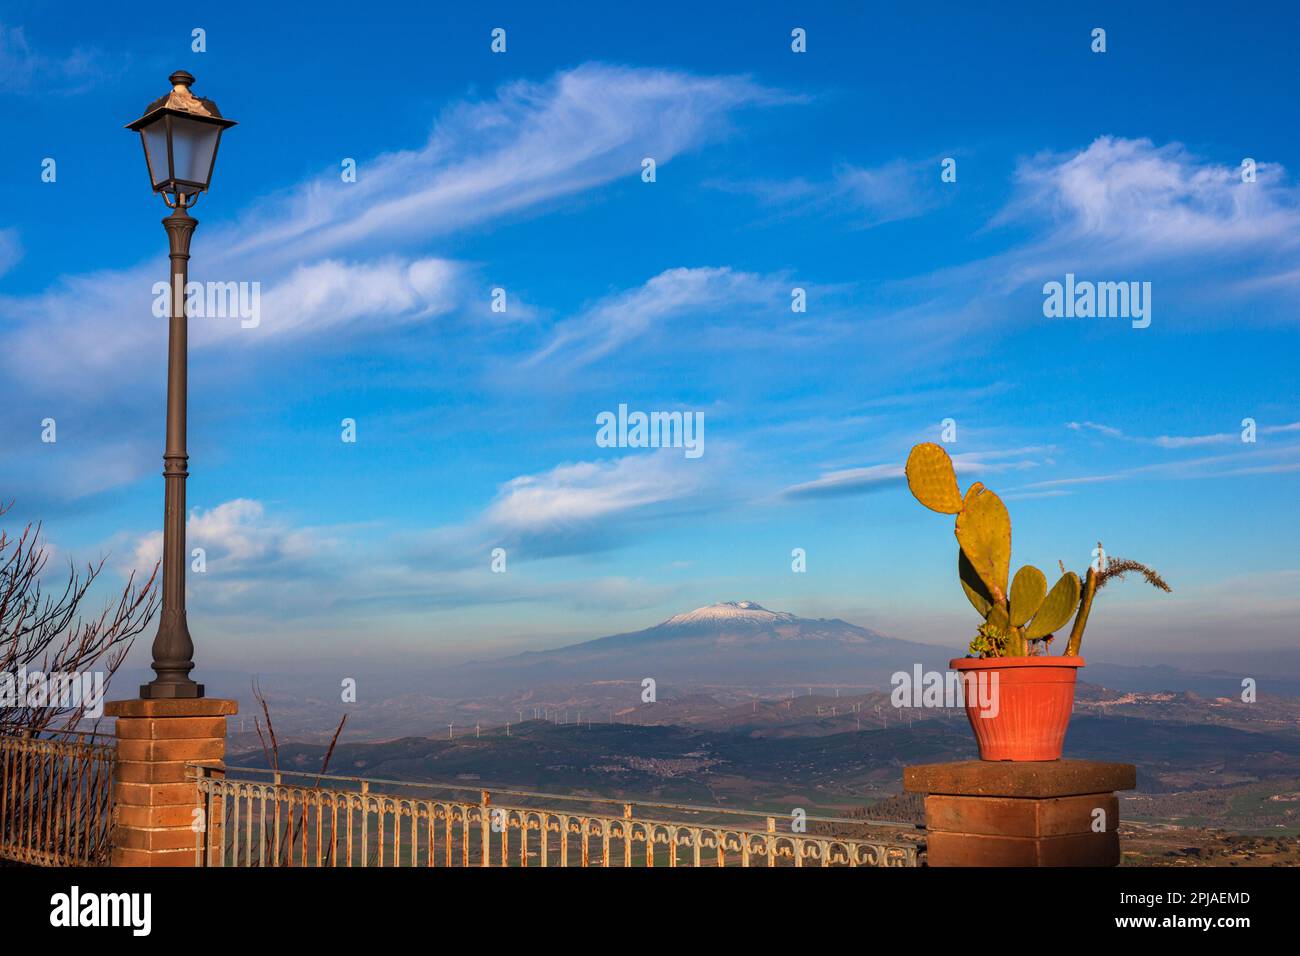 Pot of prickly pear plant and volcano Etna covered with snow in background. Aidone, Sicily Stock Photo